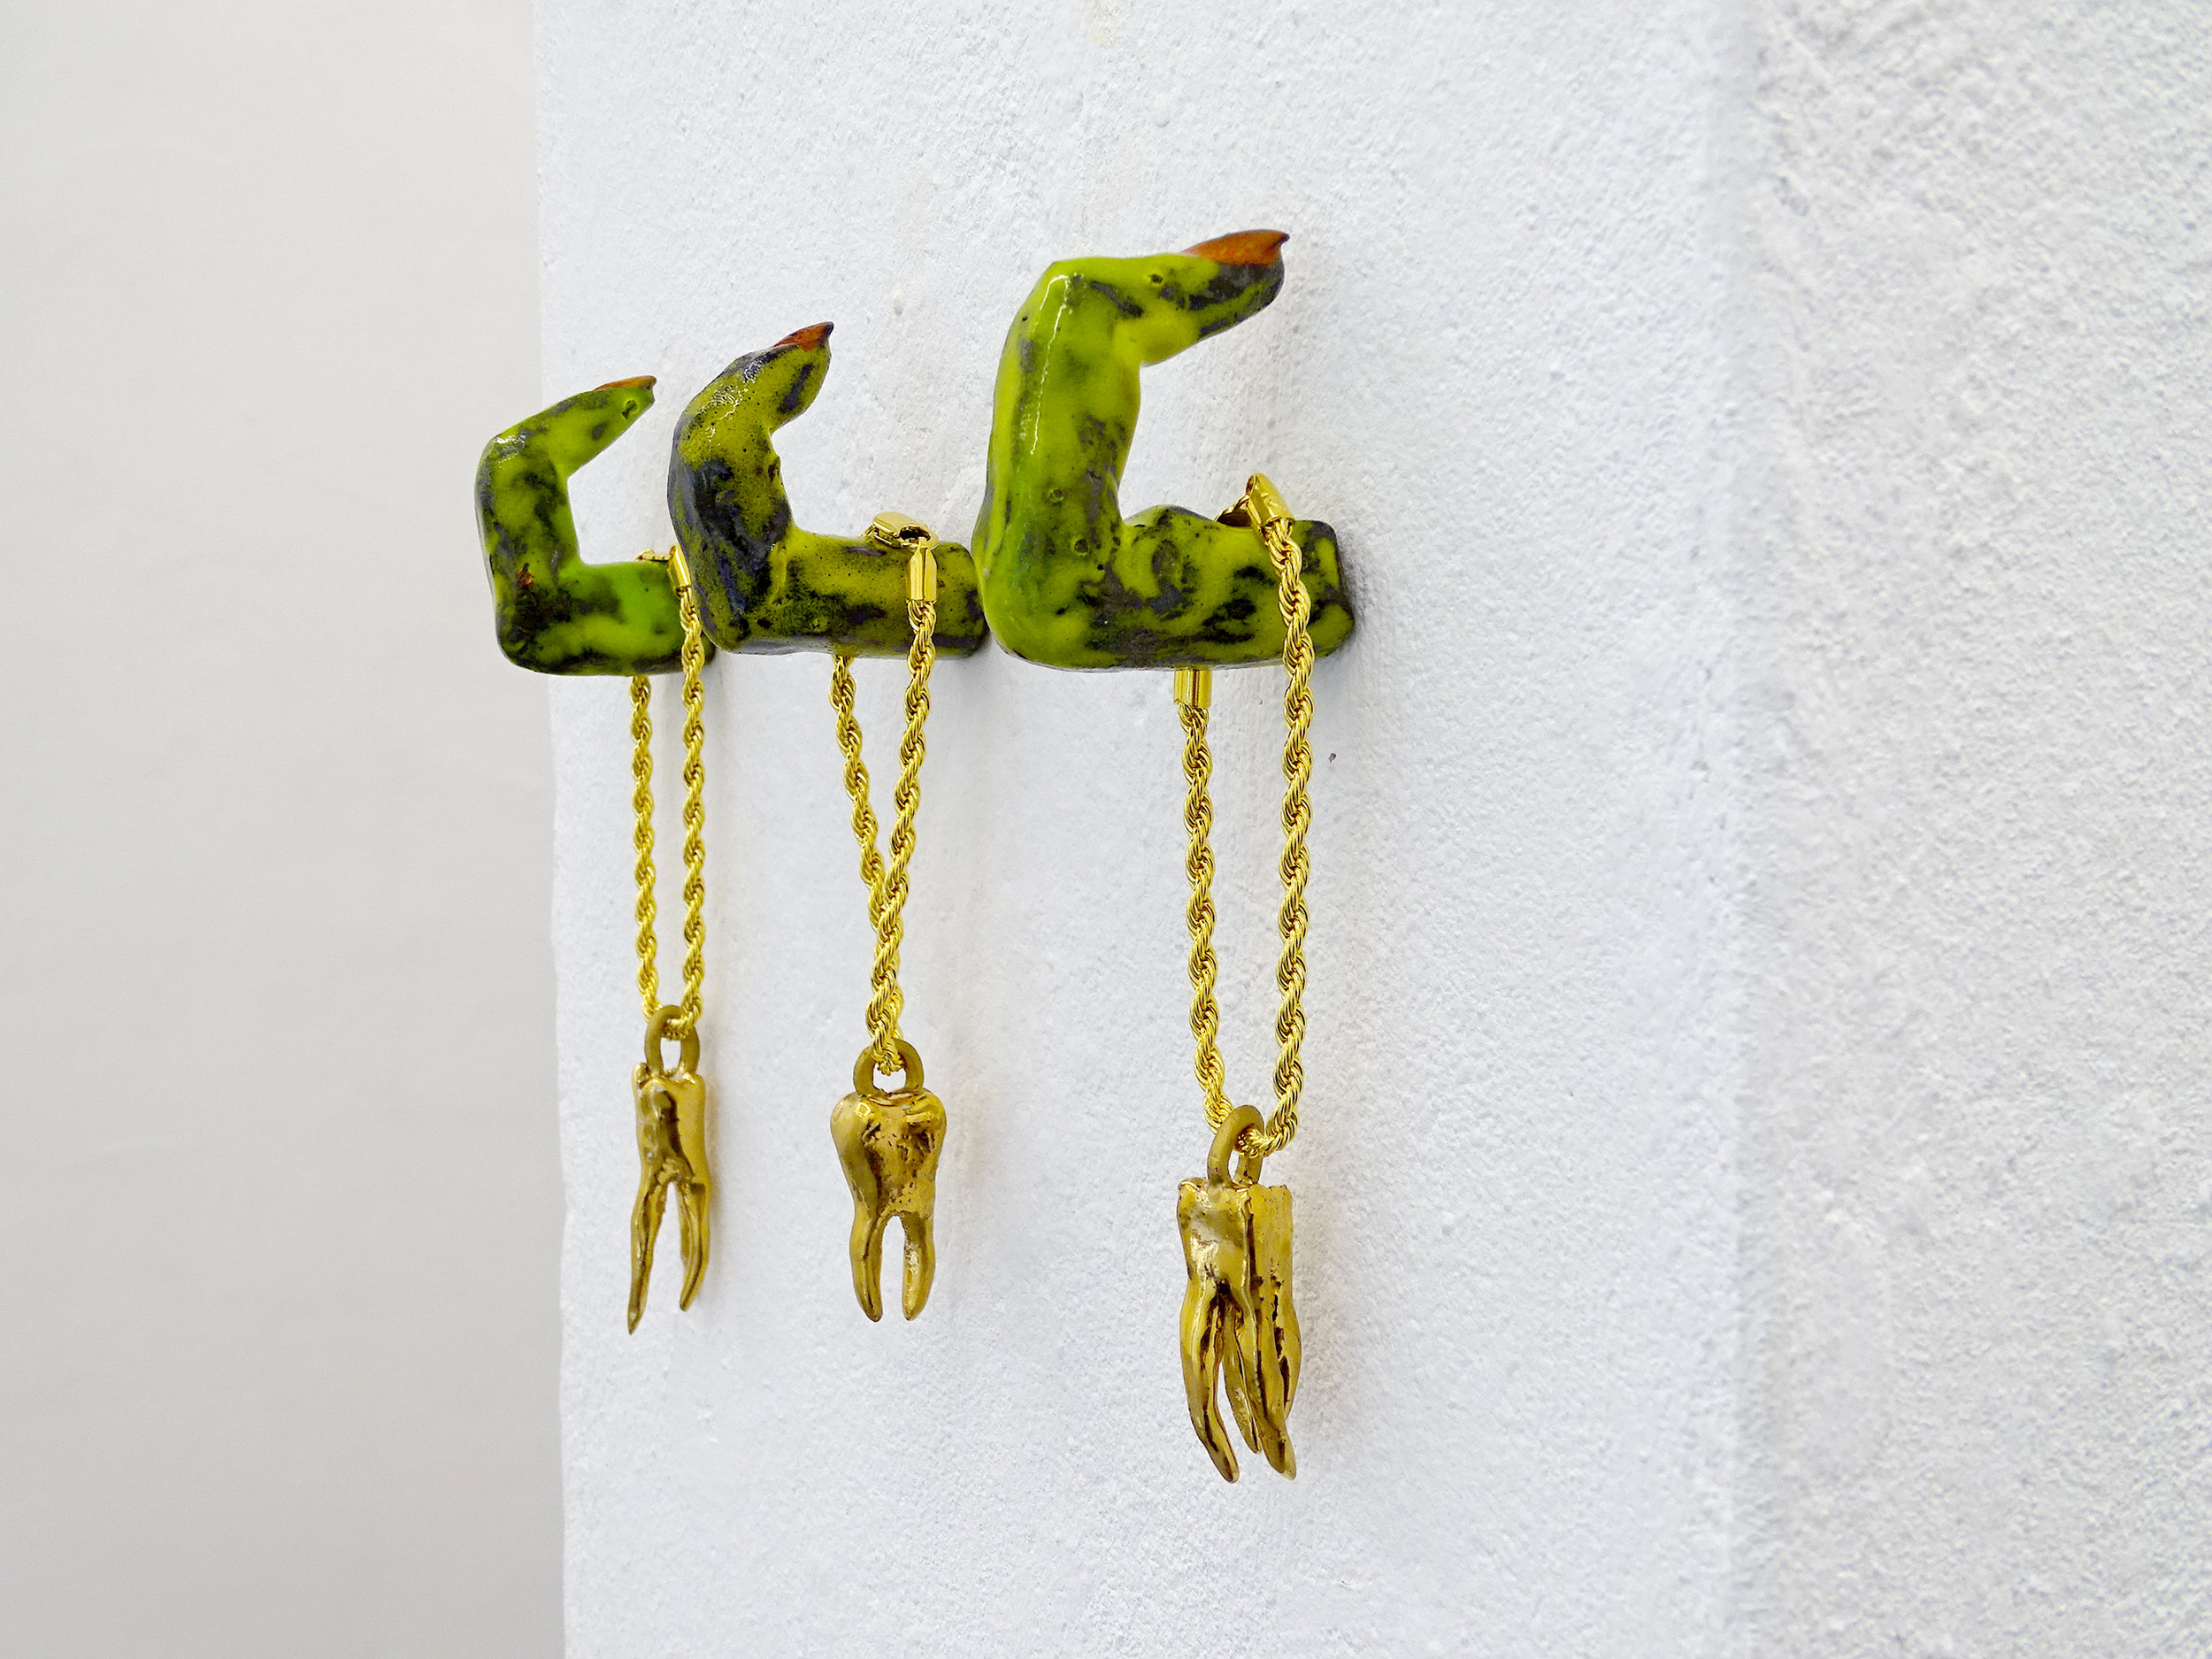 (06) Of All the Things I’ve Lost Proudick (Lindsey Mendick & Paloma Proudfoot) Hannah Barry Gallery at Ballon Rouge Club, Brussels  PROUDICK Oh charming!, 2019 - Installation view 22 ct gold lustre glazed ceramic 16 x.jpg